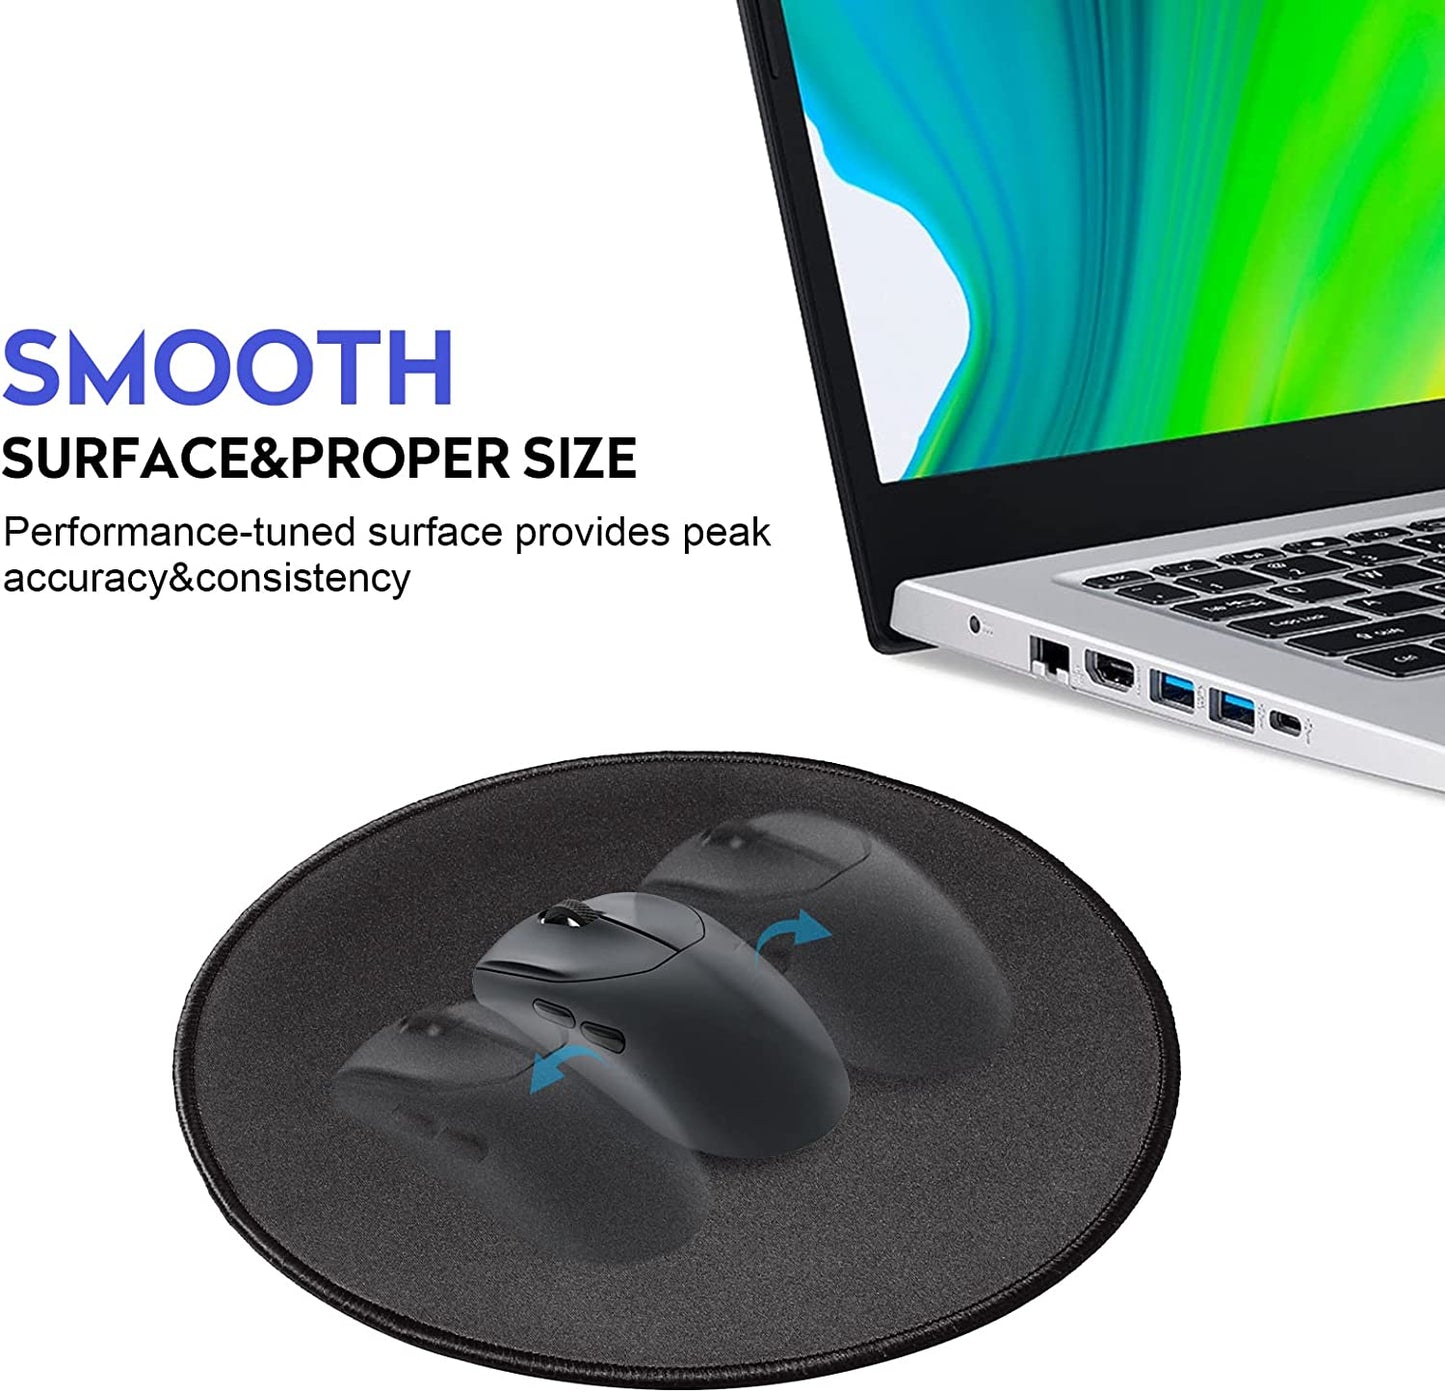 Round Mouse Pad, Premium-Textured Small Round Mousepad, Stitched Edge Anti-Slip Waterproof Rubber Mouse Mat, Home Office Desk Accessories 9.4 x 9.4 Inch(Black)